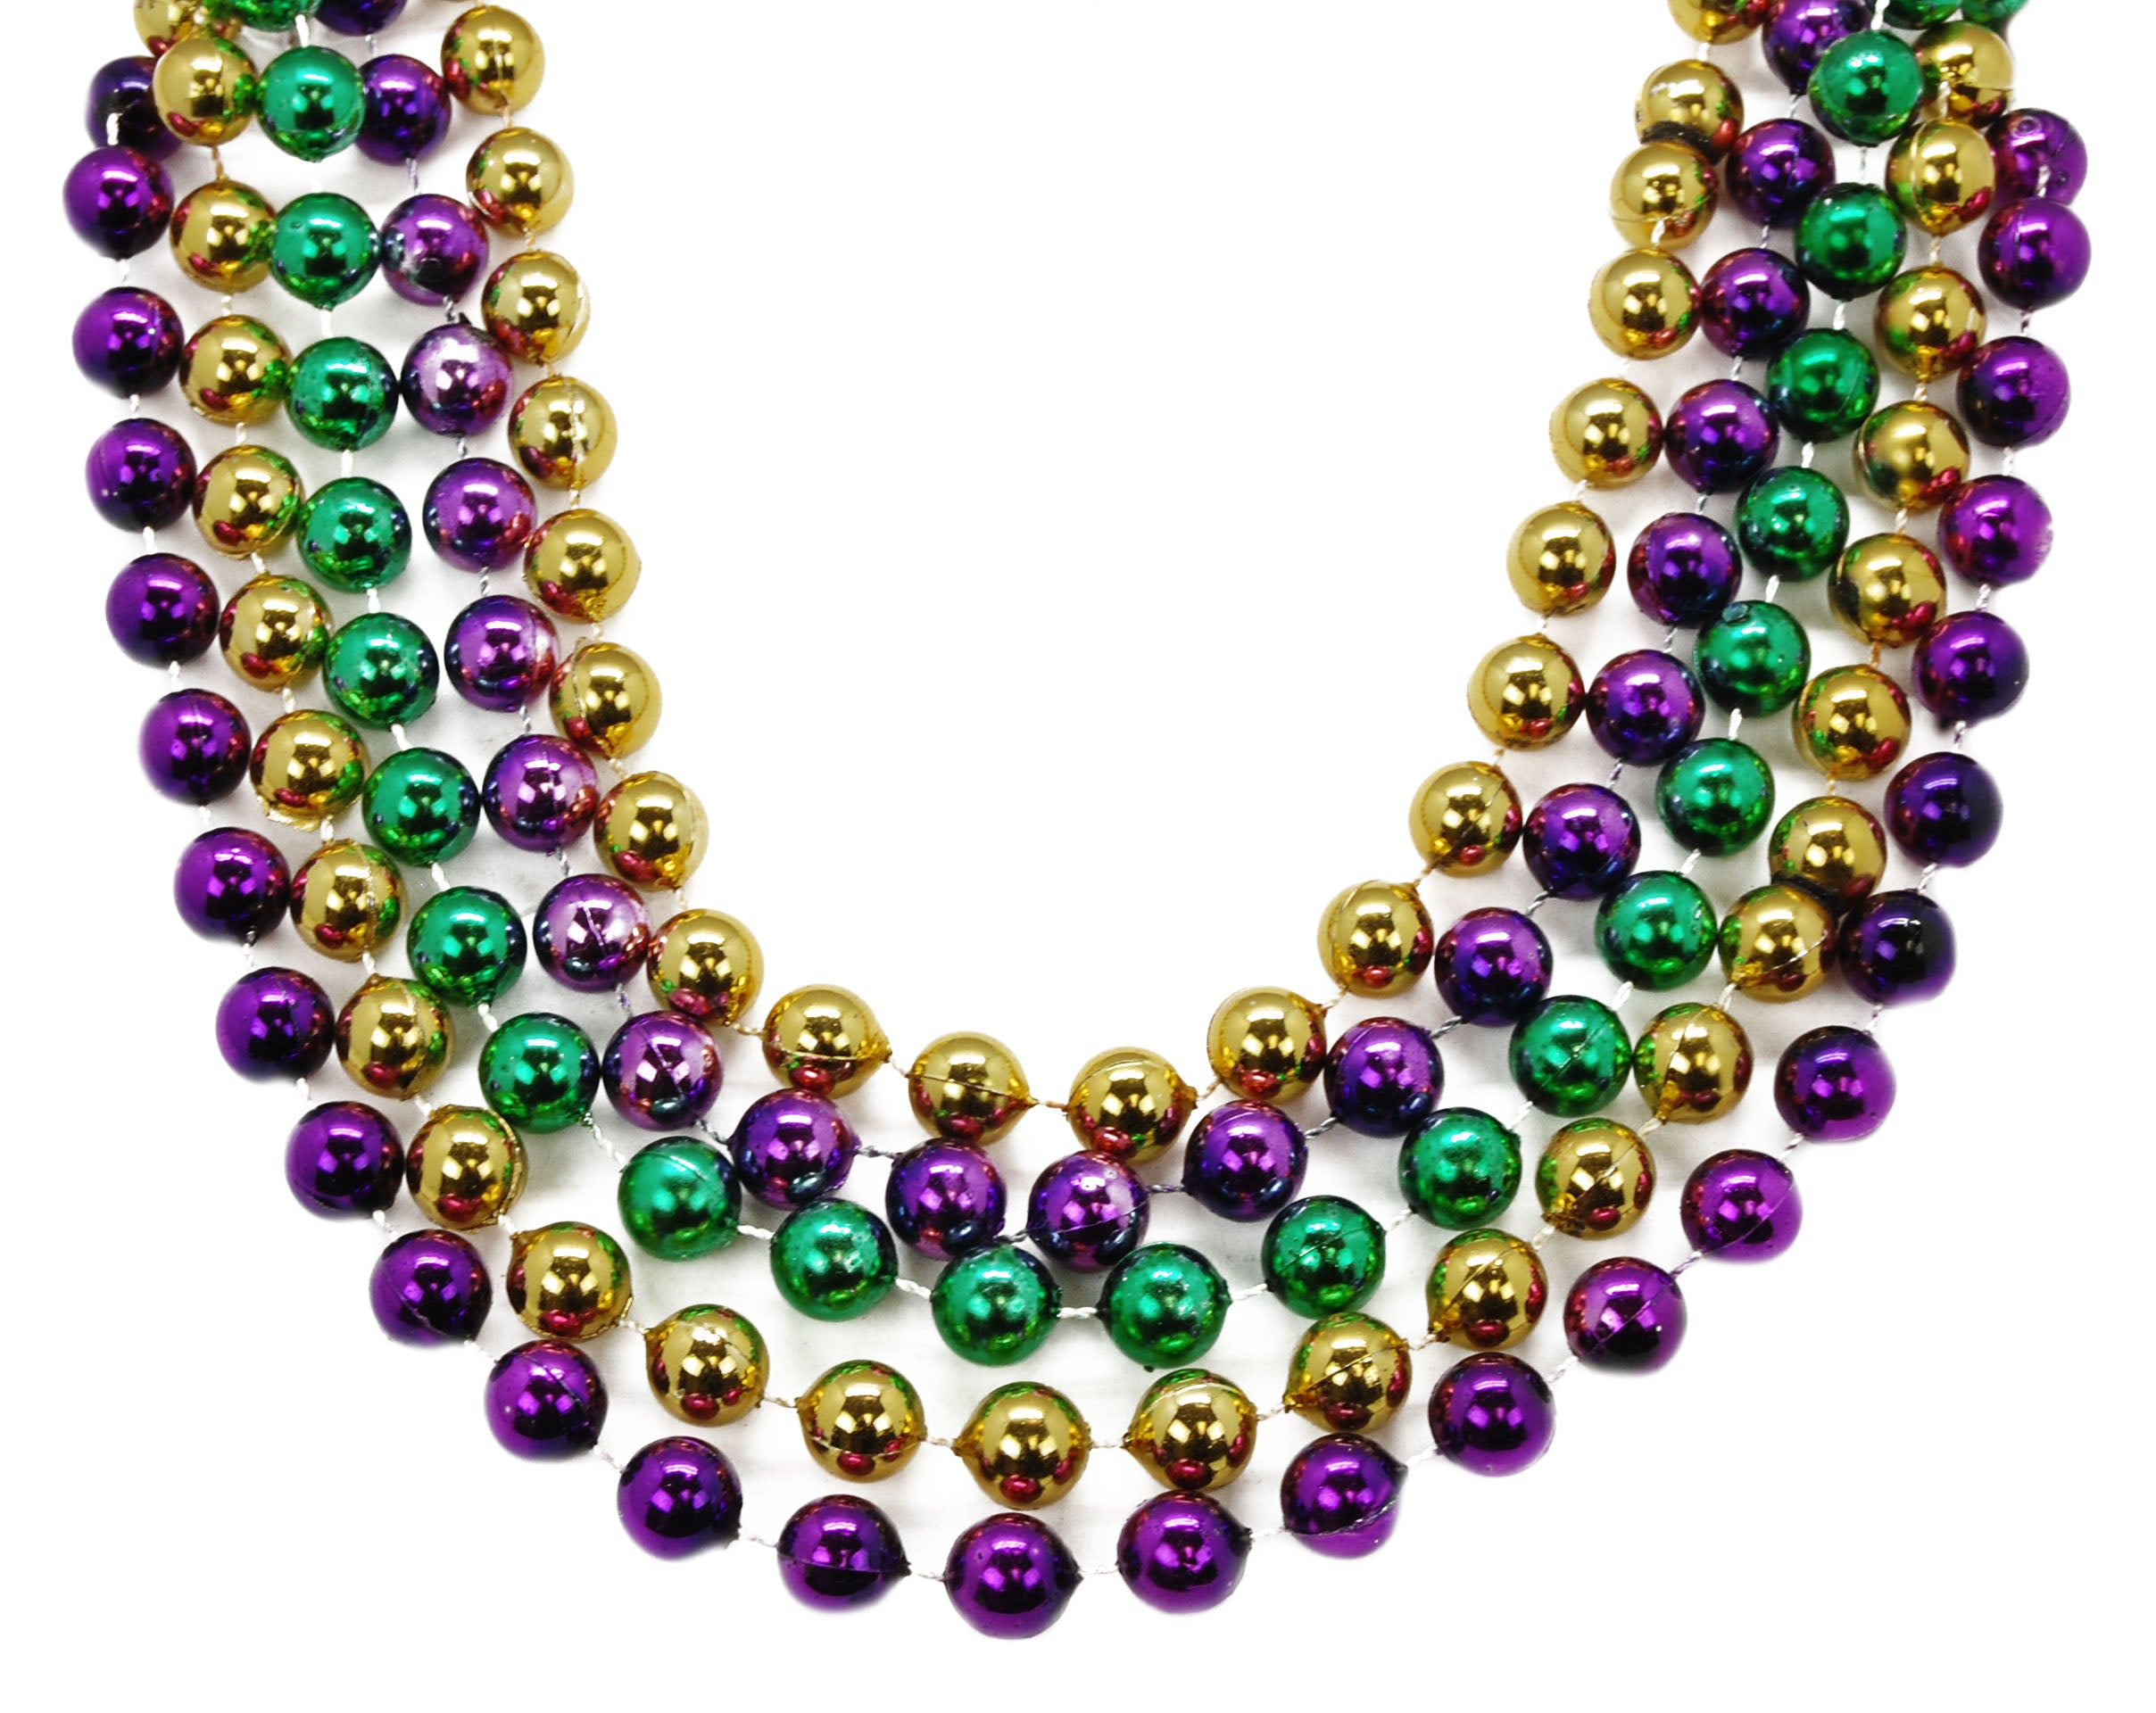 100" 14mm Round Beads Purple, Green, and Gold